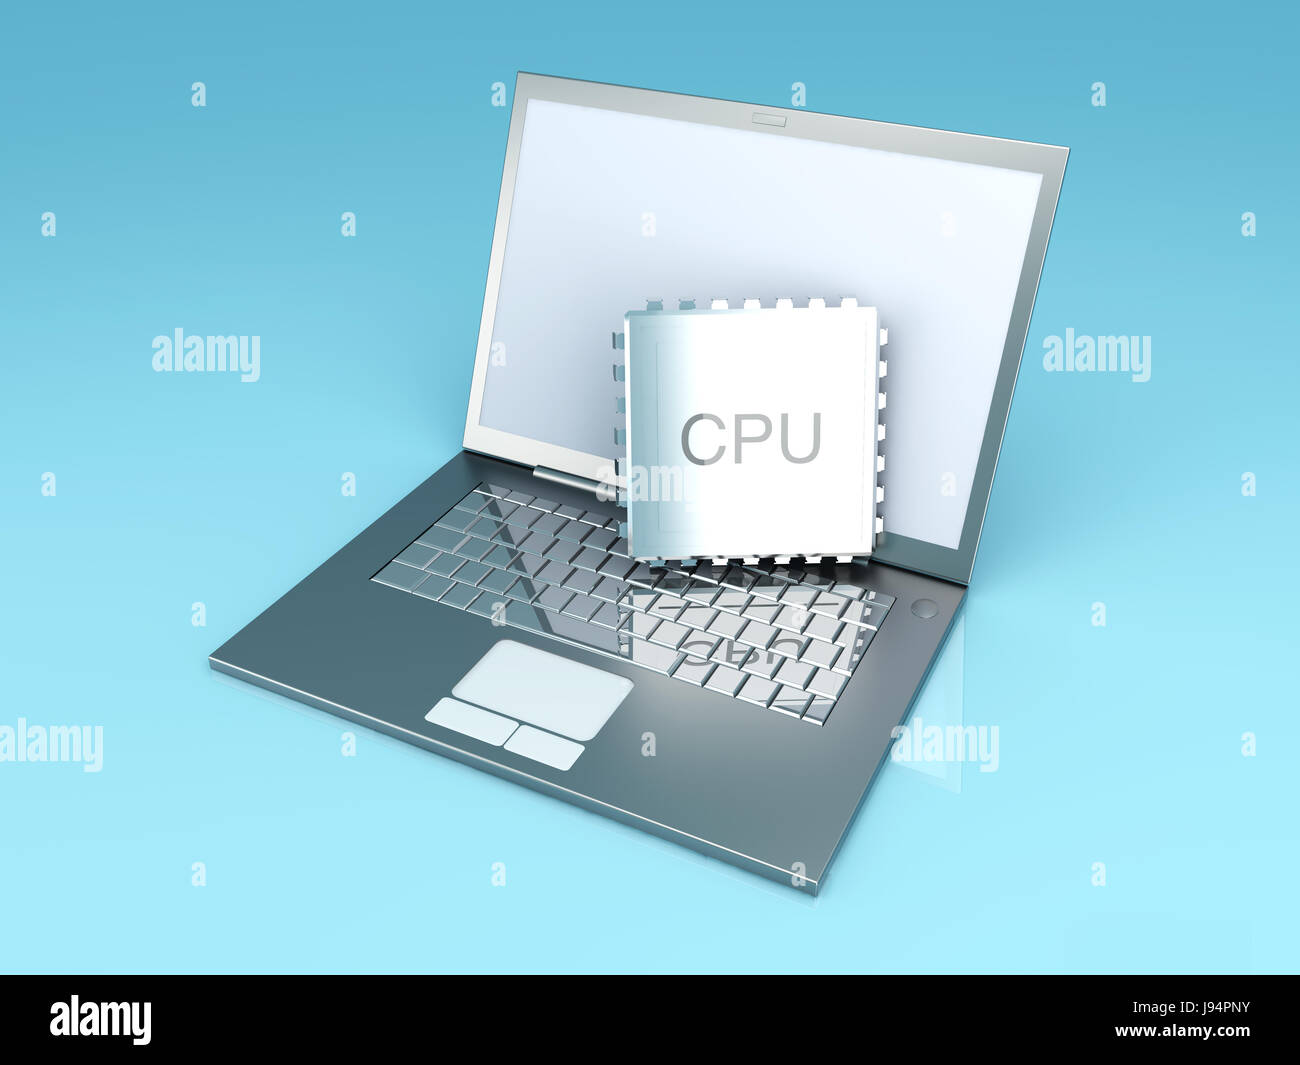 laptop, notebook, computers, computer, graphic, hardware, small, tiny, little, Stock Photo